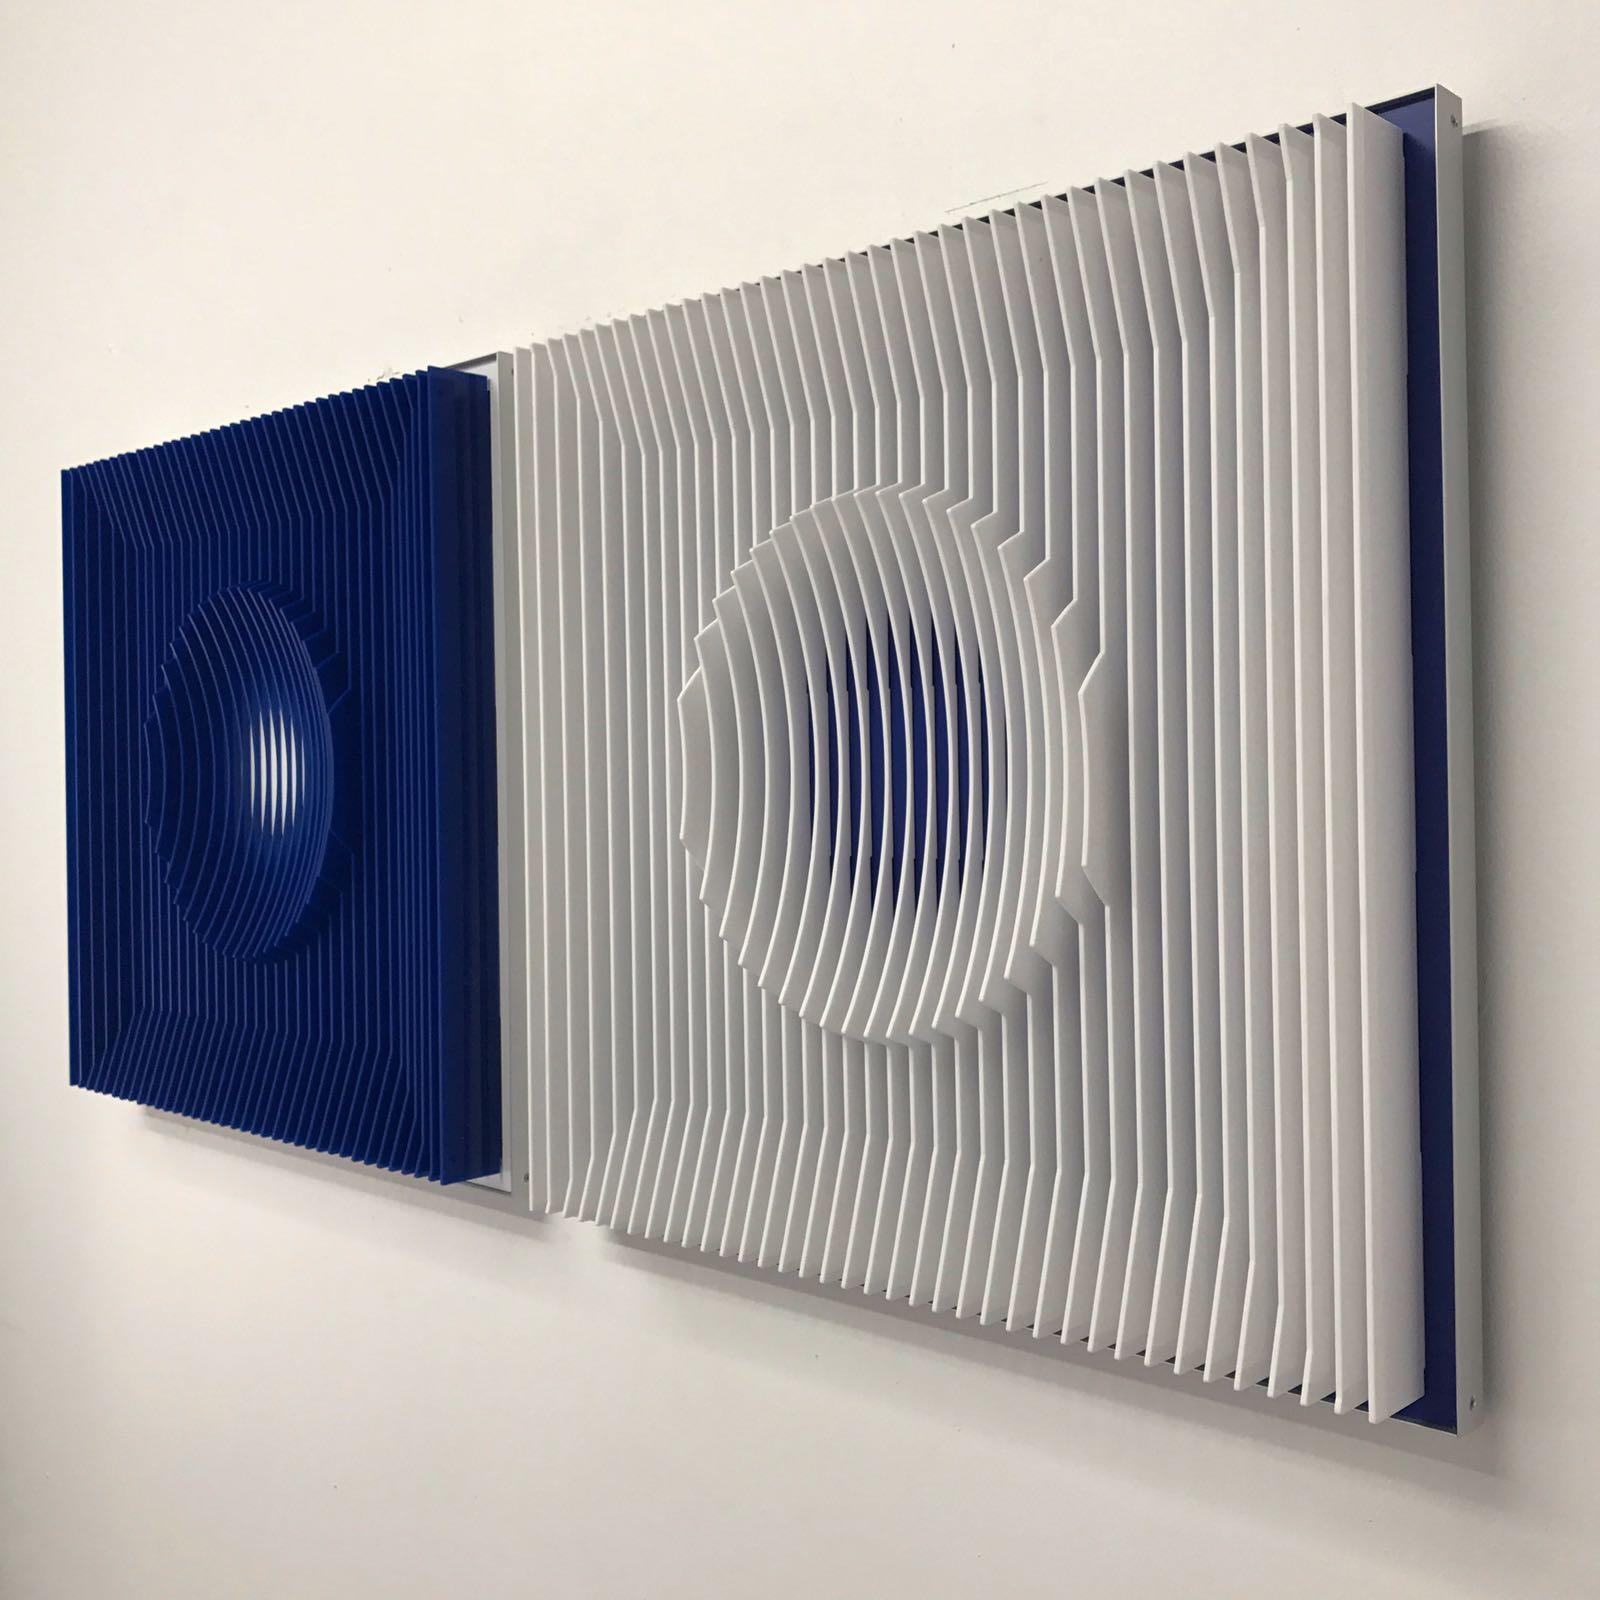 This beautiful diptych by Margulis is a contemporary kinetic wall sculpture that can be hung horizontally or vertically. 
Please take a look at the video so how it looks from different angles
This diptych is also available in different colors,